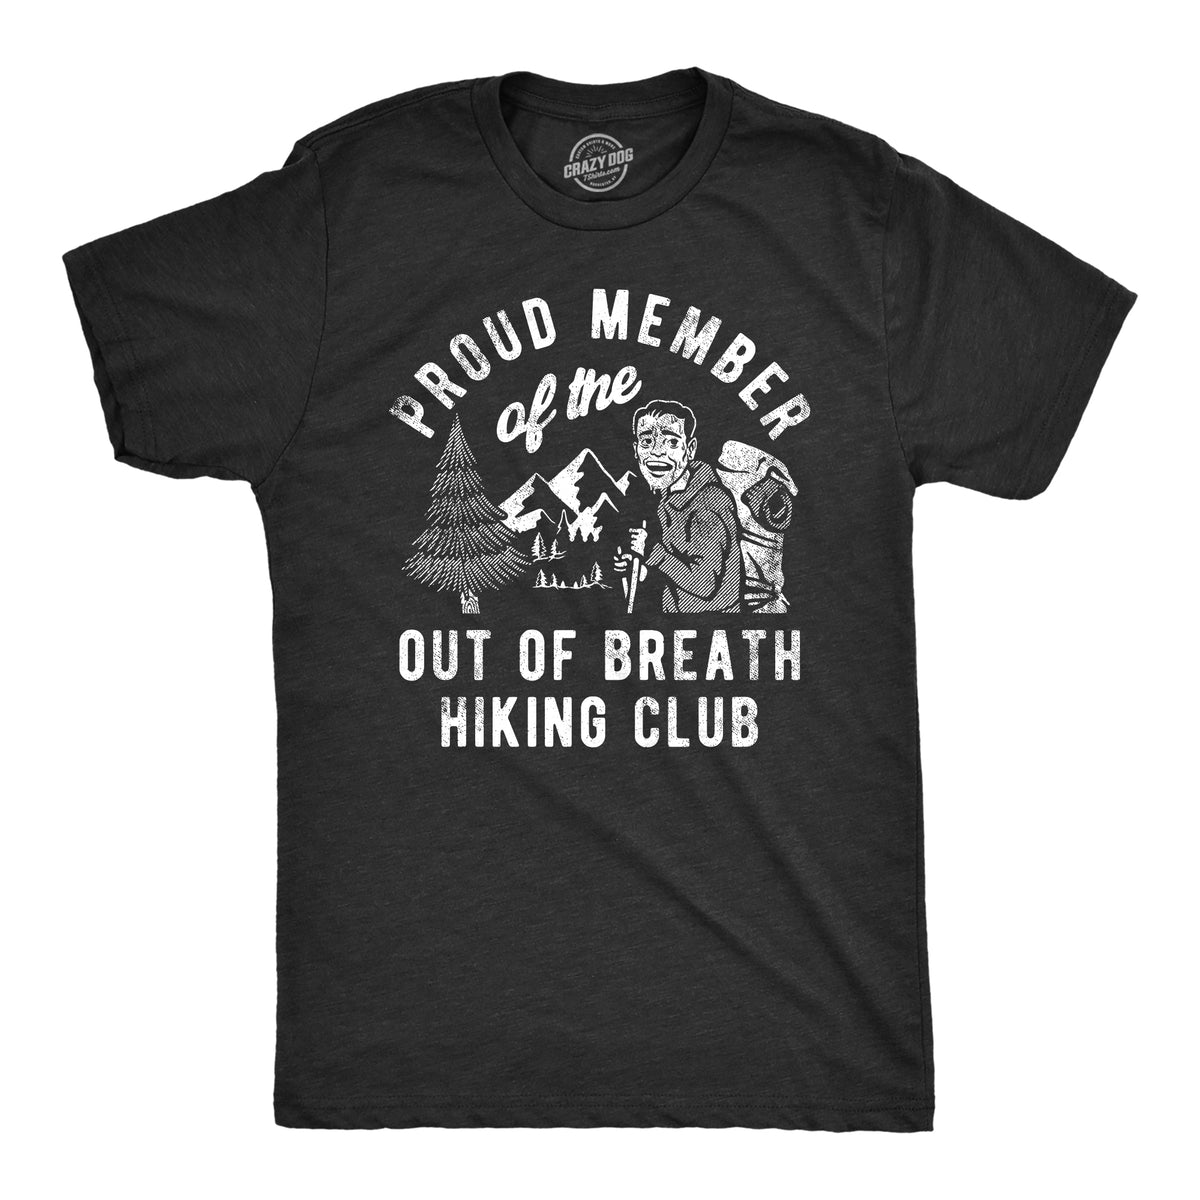 Funny Heather Black - Out Of Breath Proud Member Of the Out Of Breath Hiking Club Mens T Shirt Nerdy sarcastic Tee